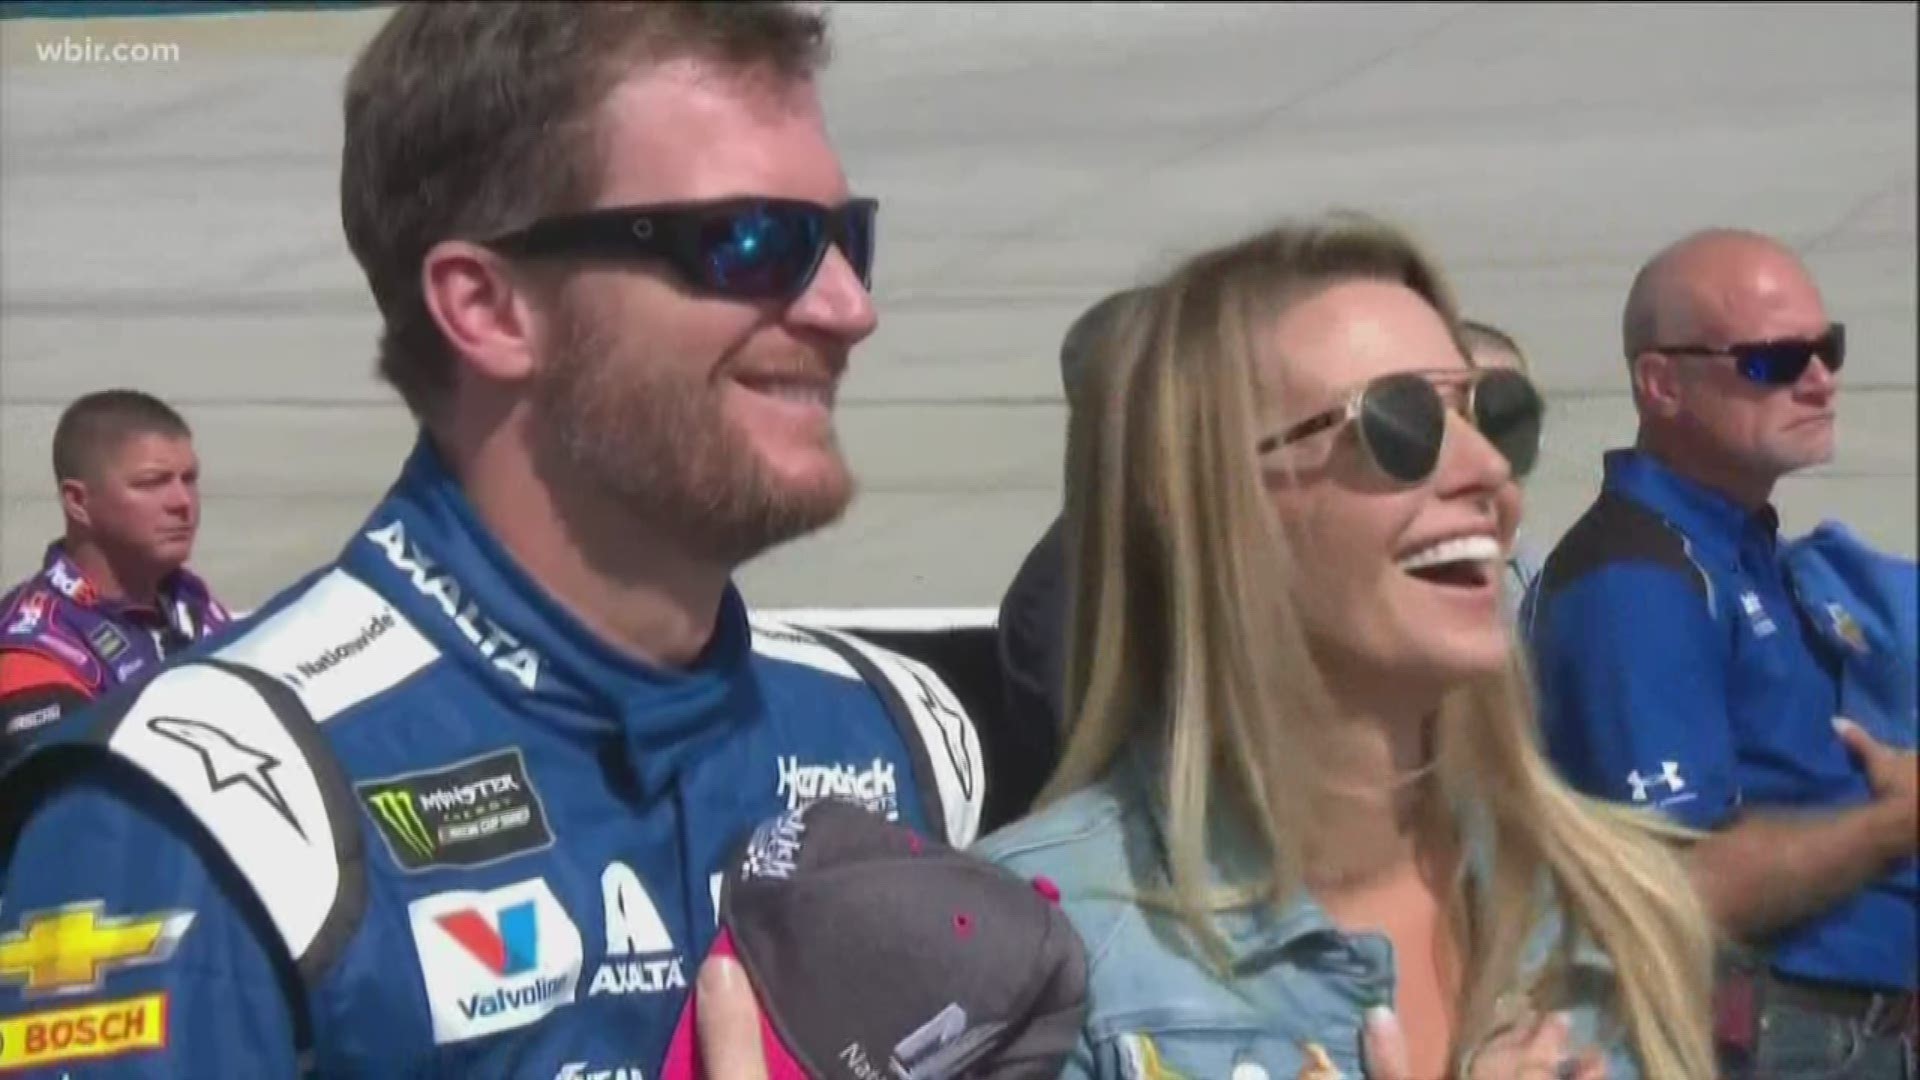 NASCAR favorite Dale Earnhardt Jr. tweeted that he's still planning to race next weekend- even as he recovers from a plane crash in East Tennessee.